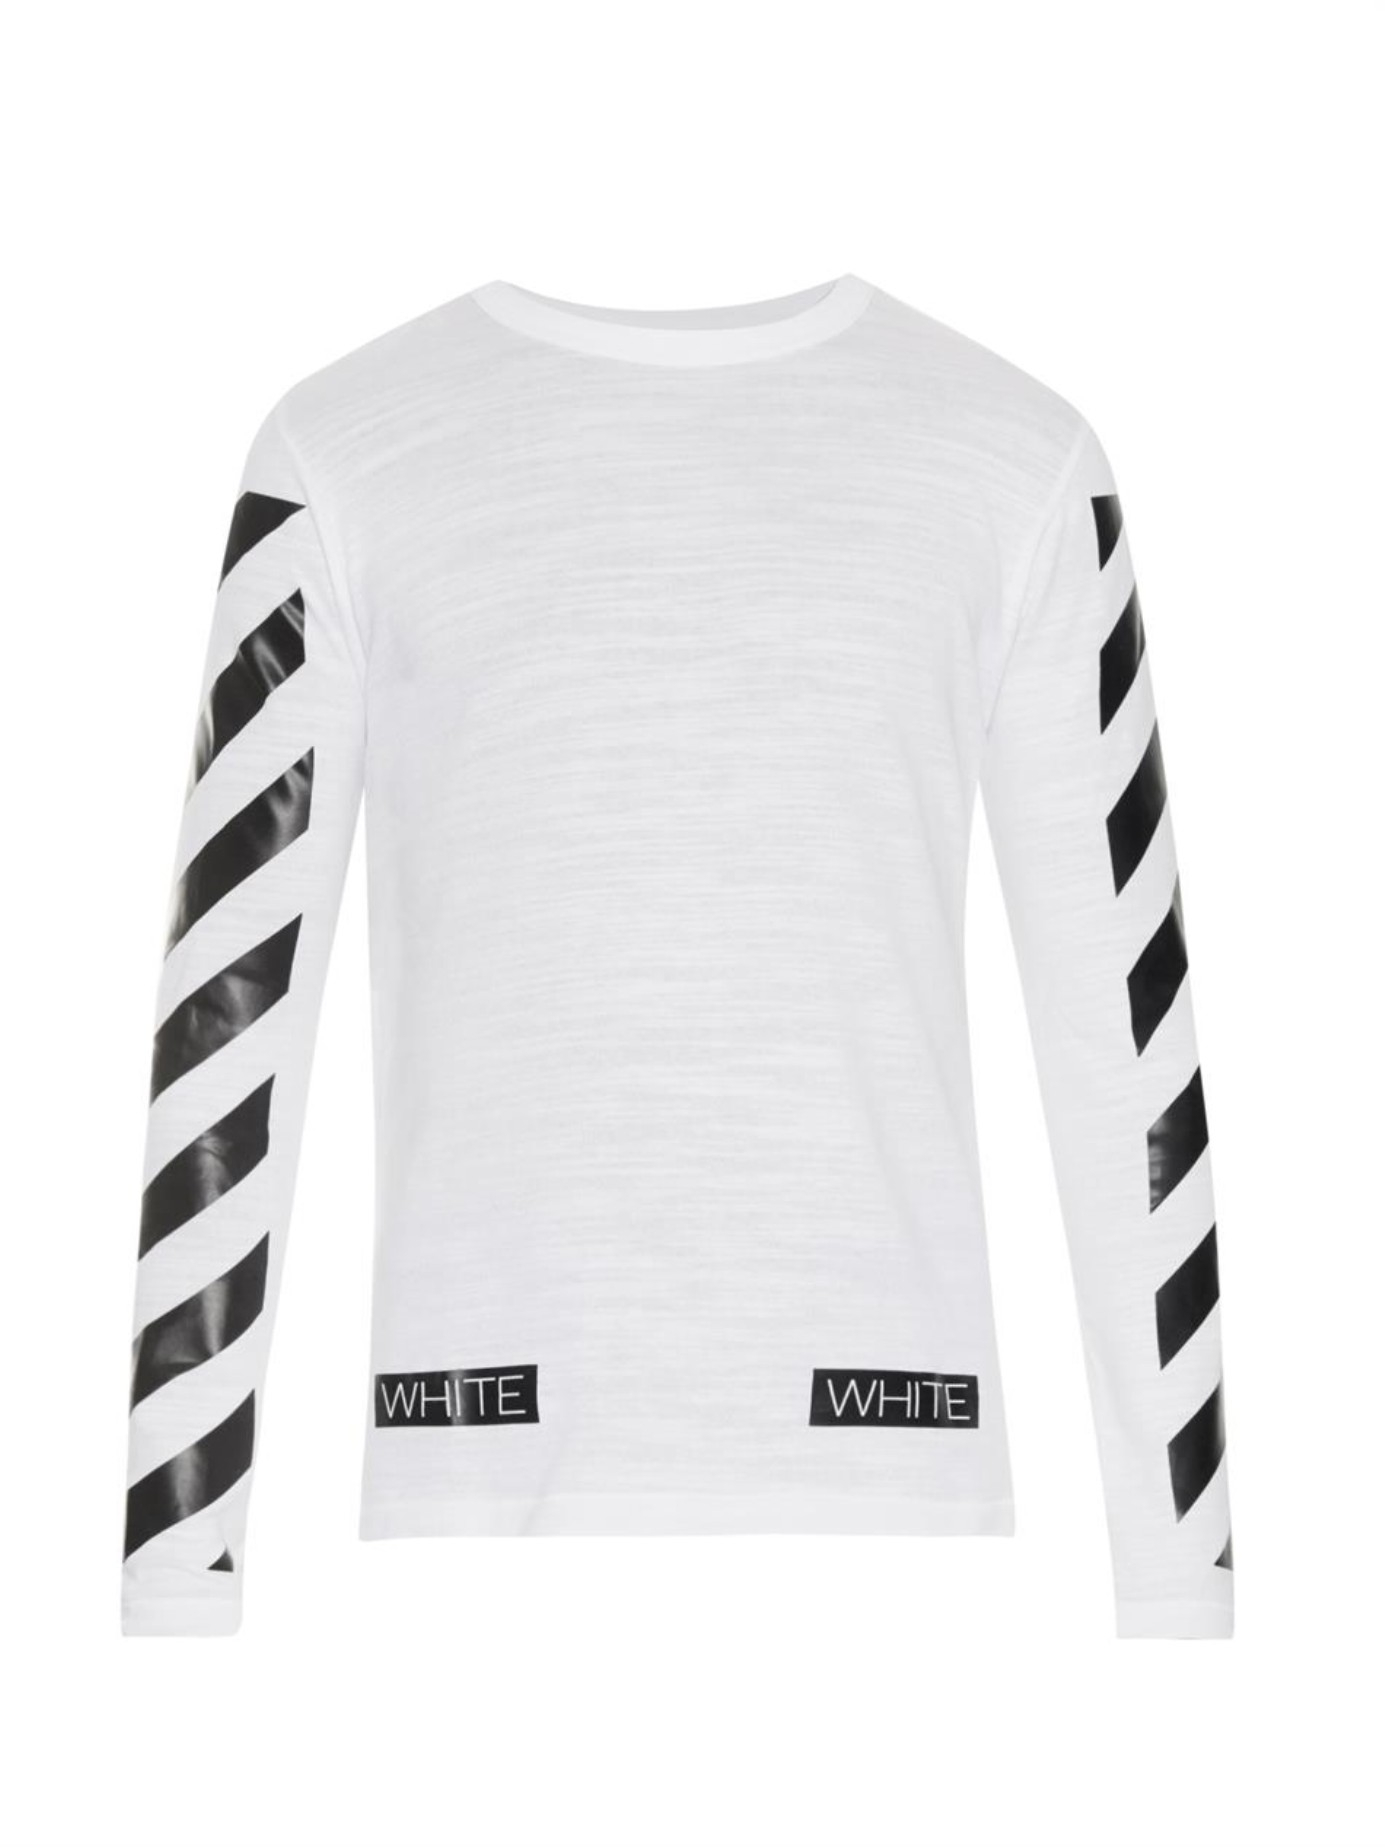 Roblox Black Skirt Earn Points And Get Robux - roblox black and white striped shirt